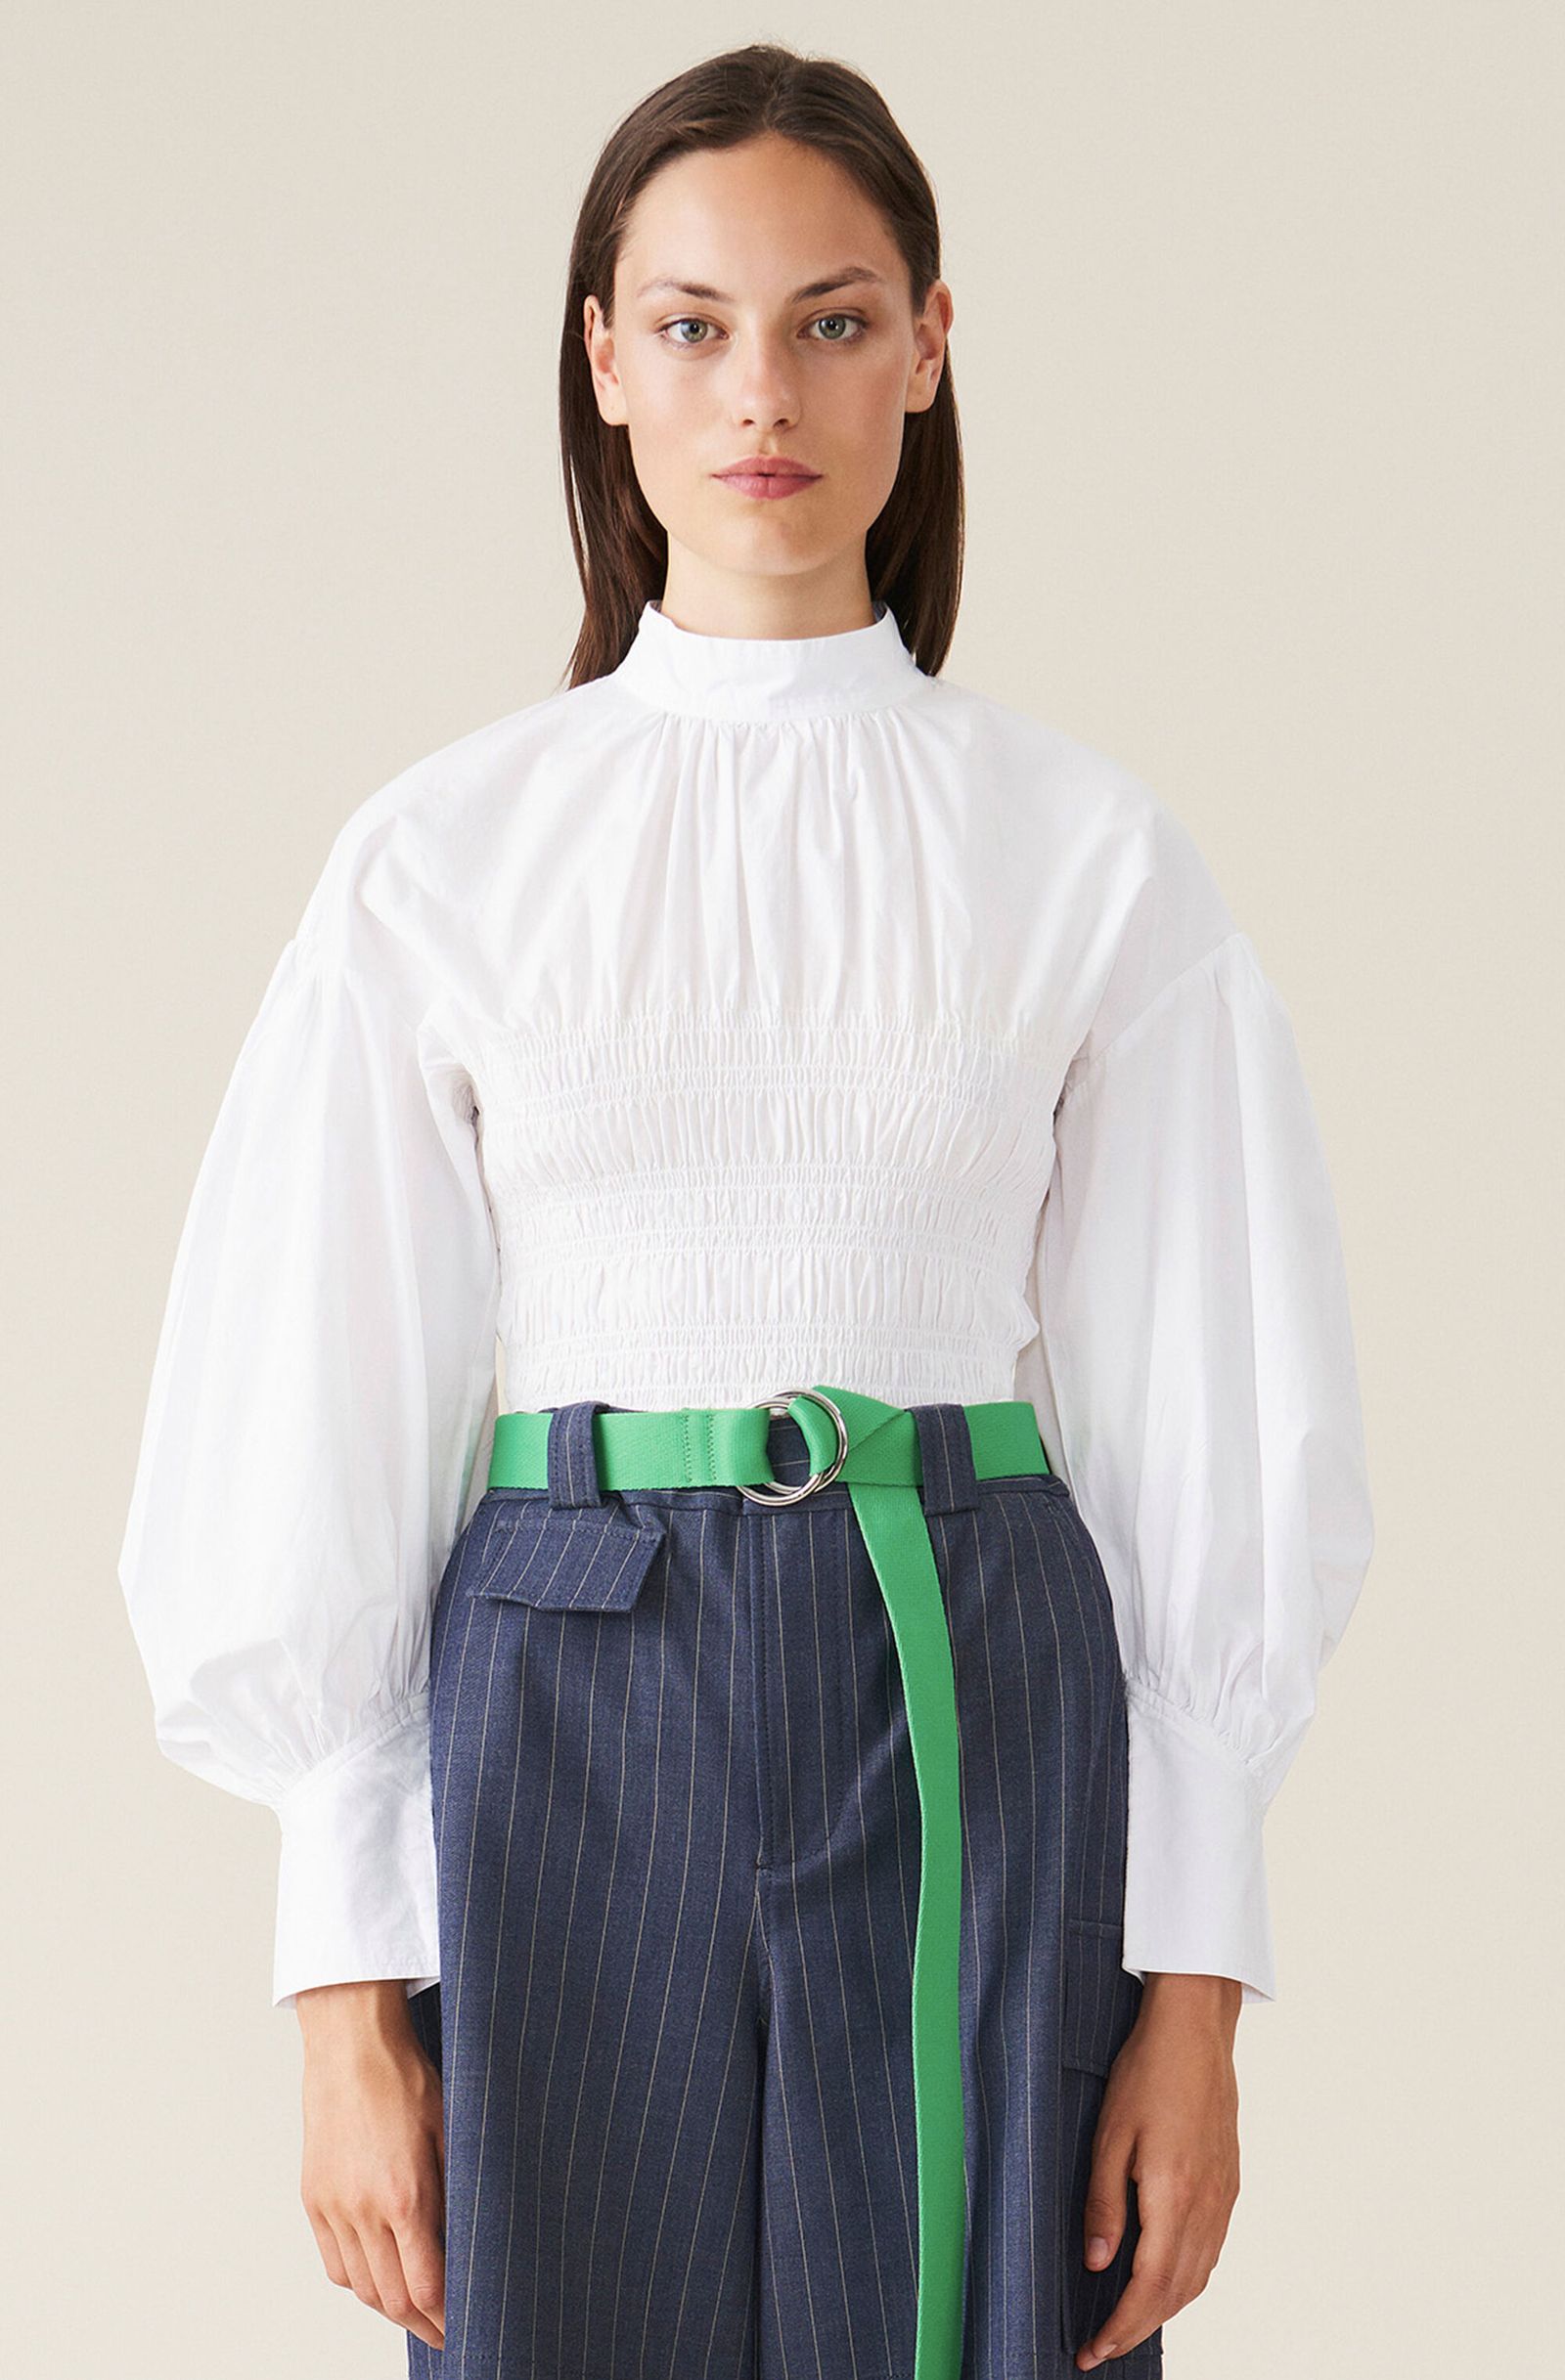 The 33 Best White Blouses We're Wearing on Repeat in 2021 | Who What Wear